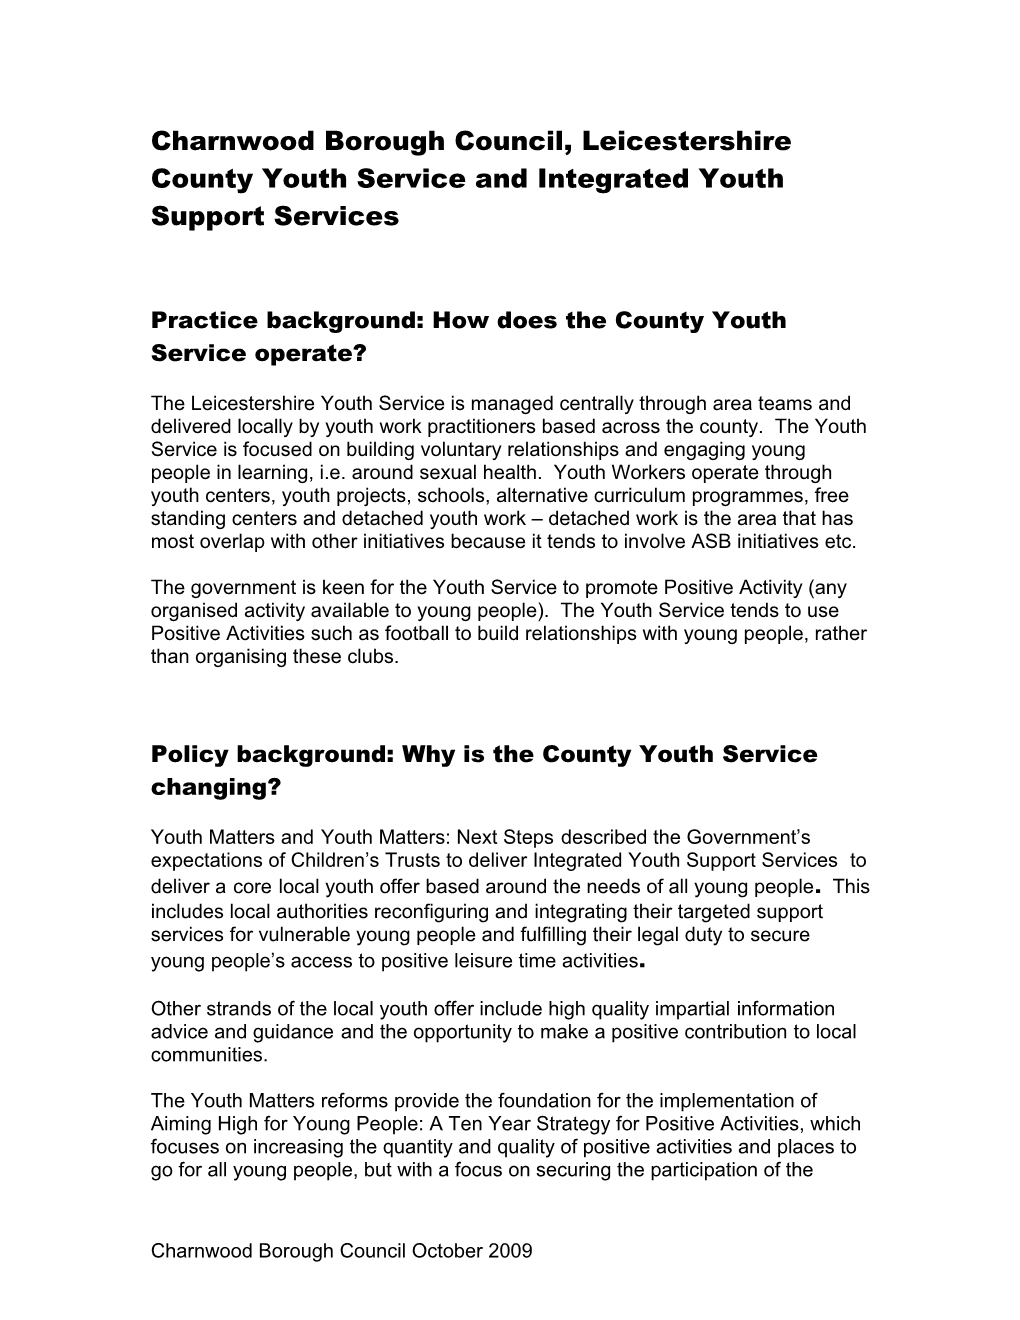 Charnwood Borough Council and Leicestershire County Youth Service